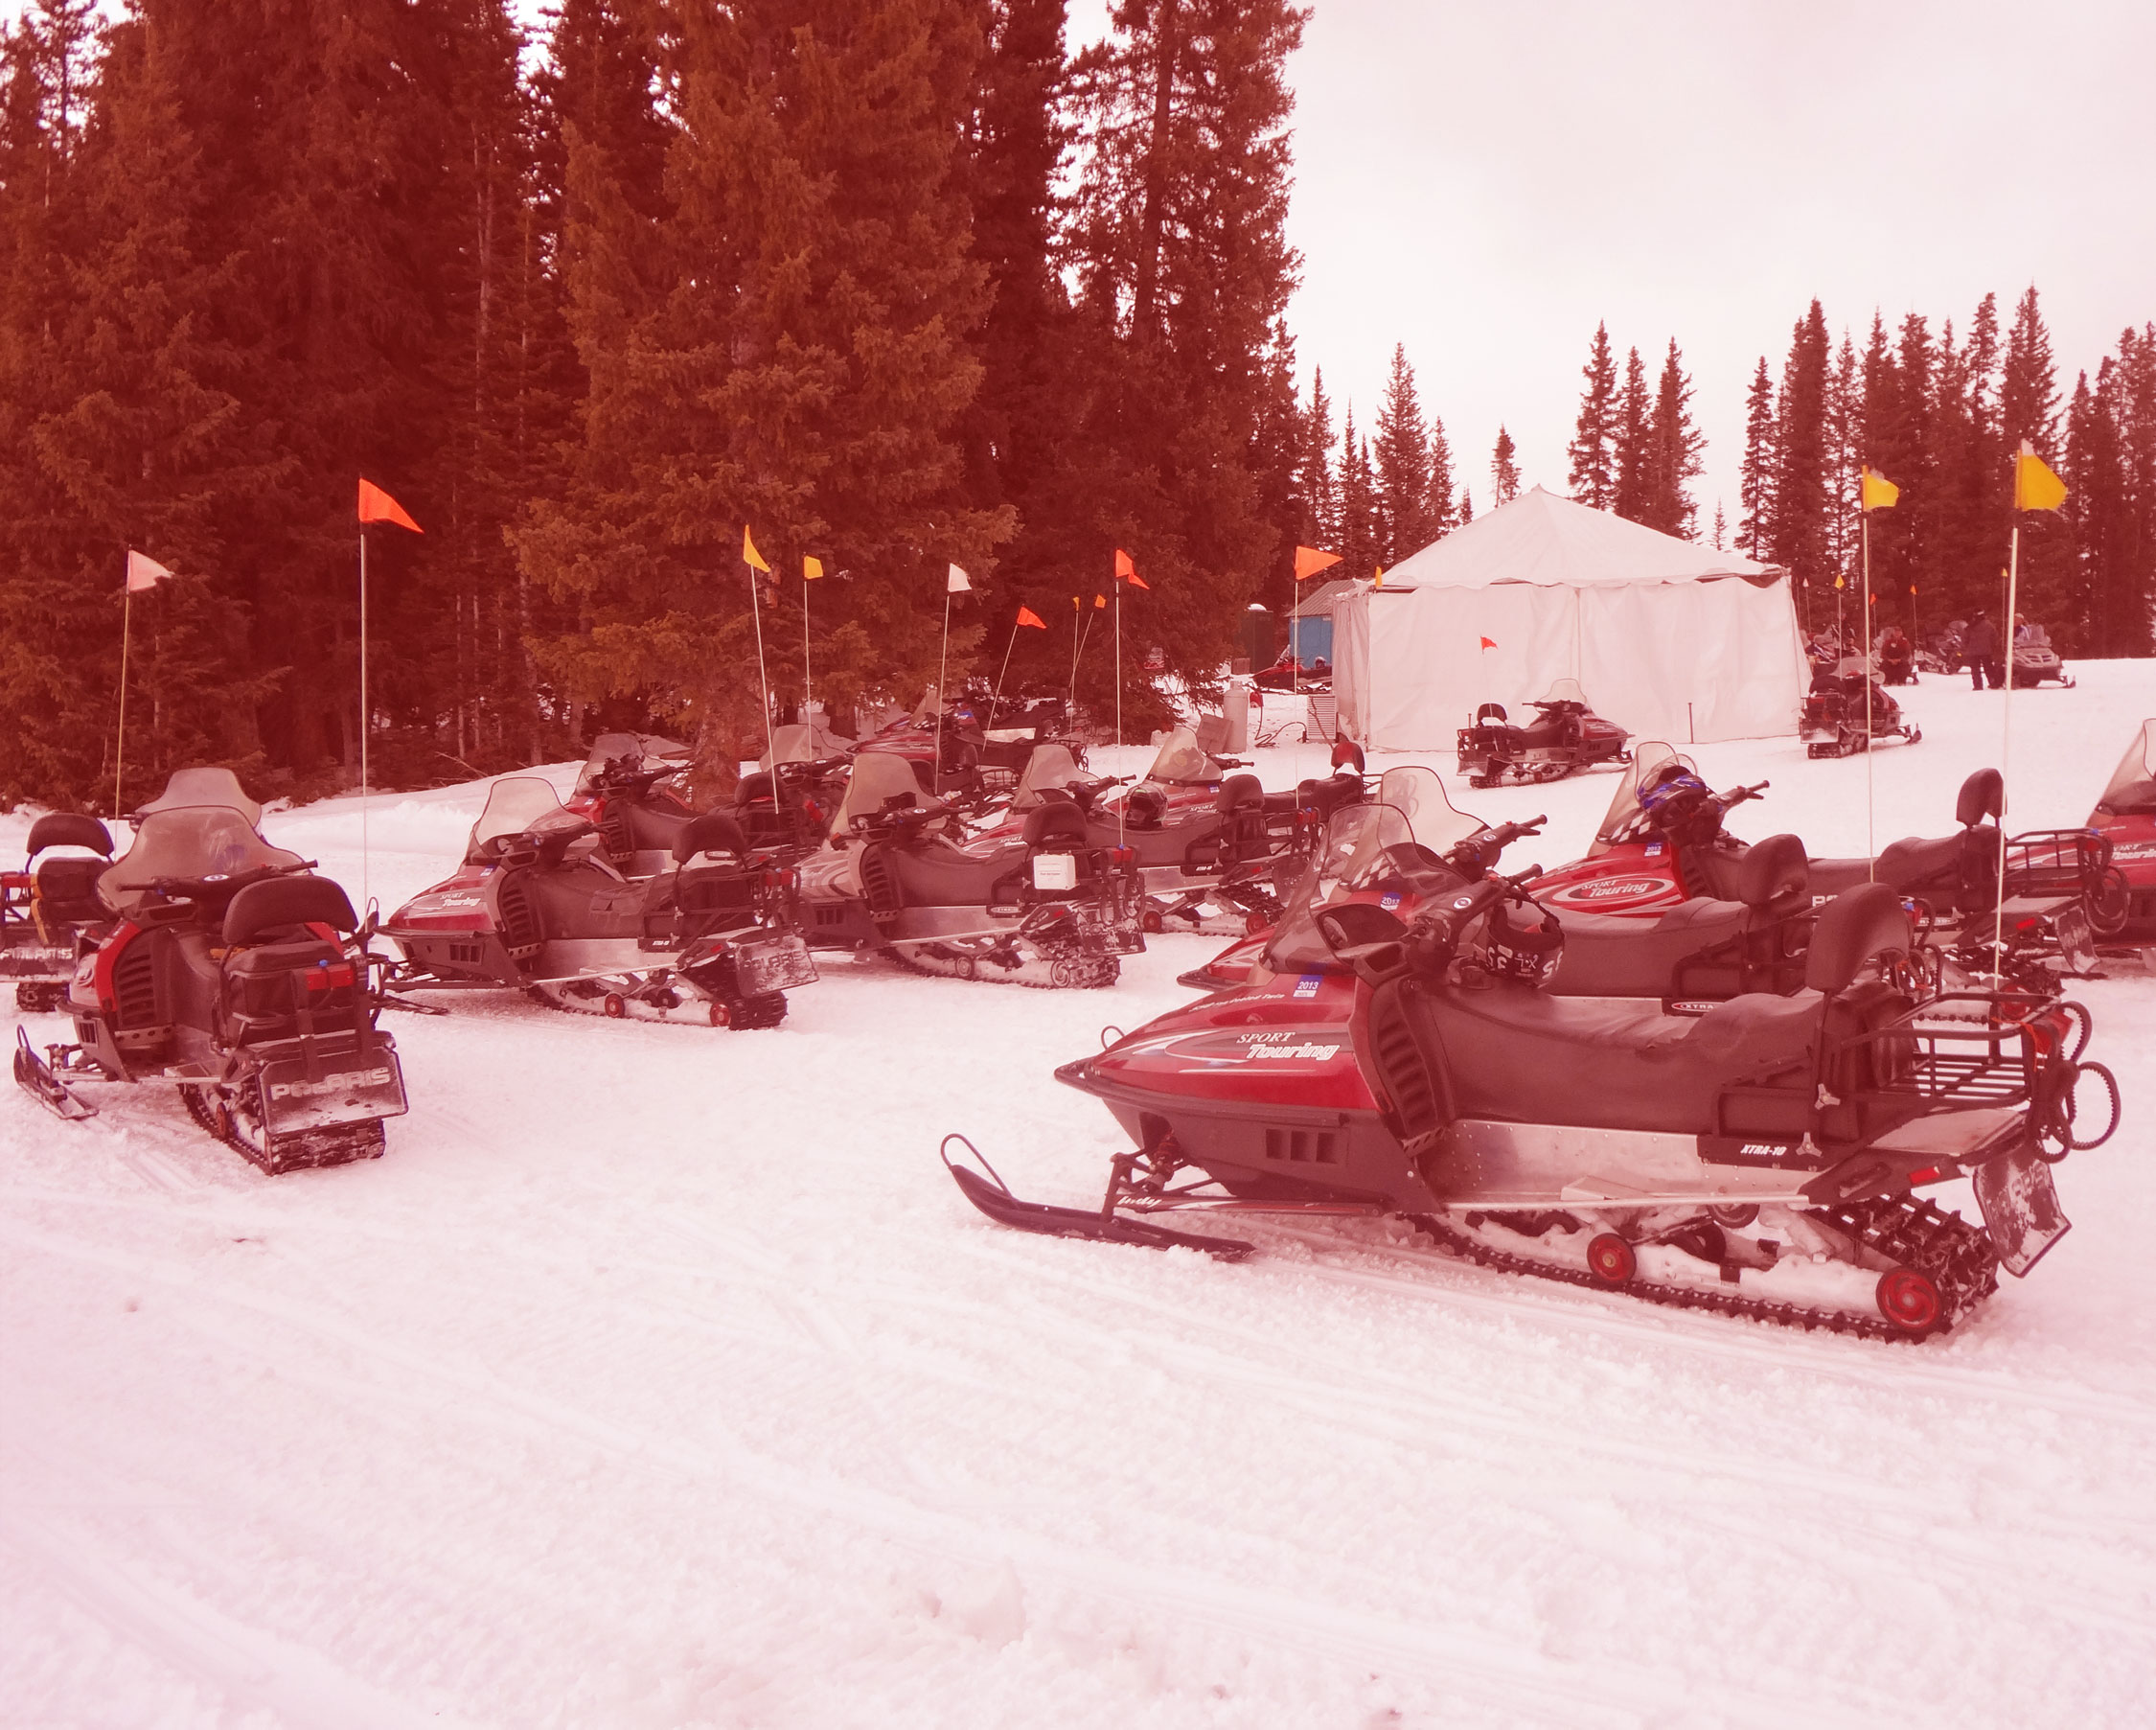 Lots of snow mobiles sit idled while everyone is enjoying Bare Assets Last Minute Bachelor Parties